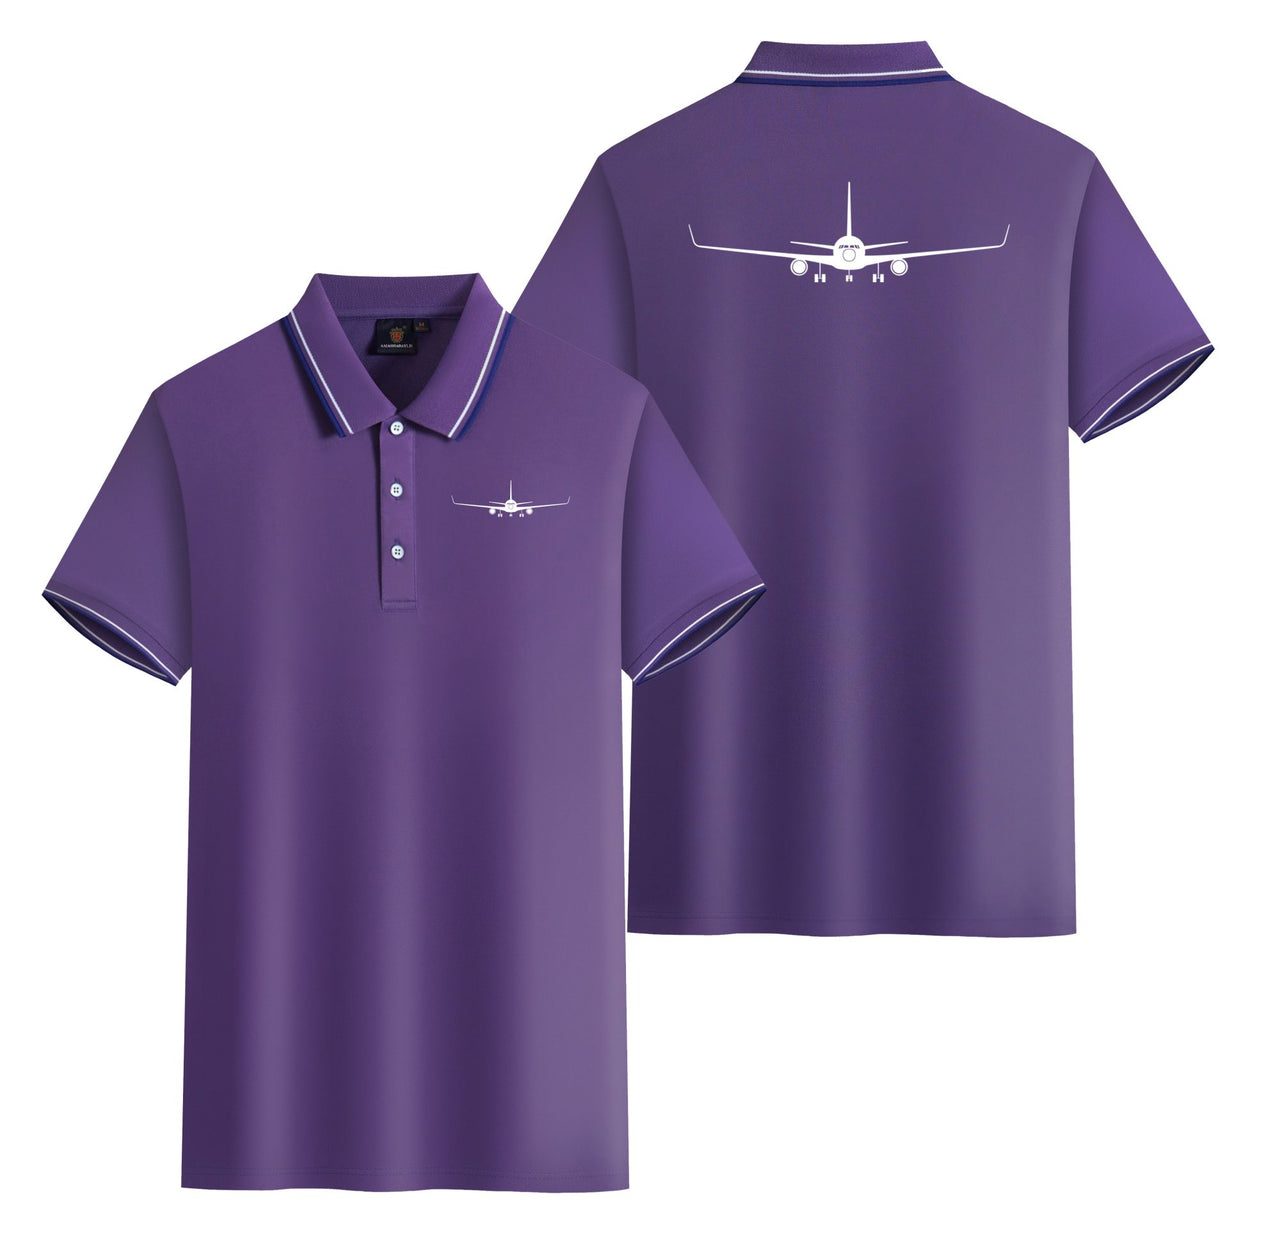 Boeing 767 Silhouette Designed Stylish Polo T-Shirts (Double-Side)